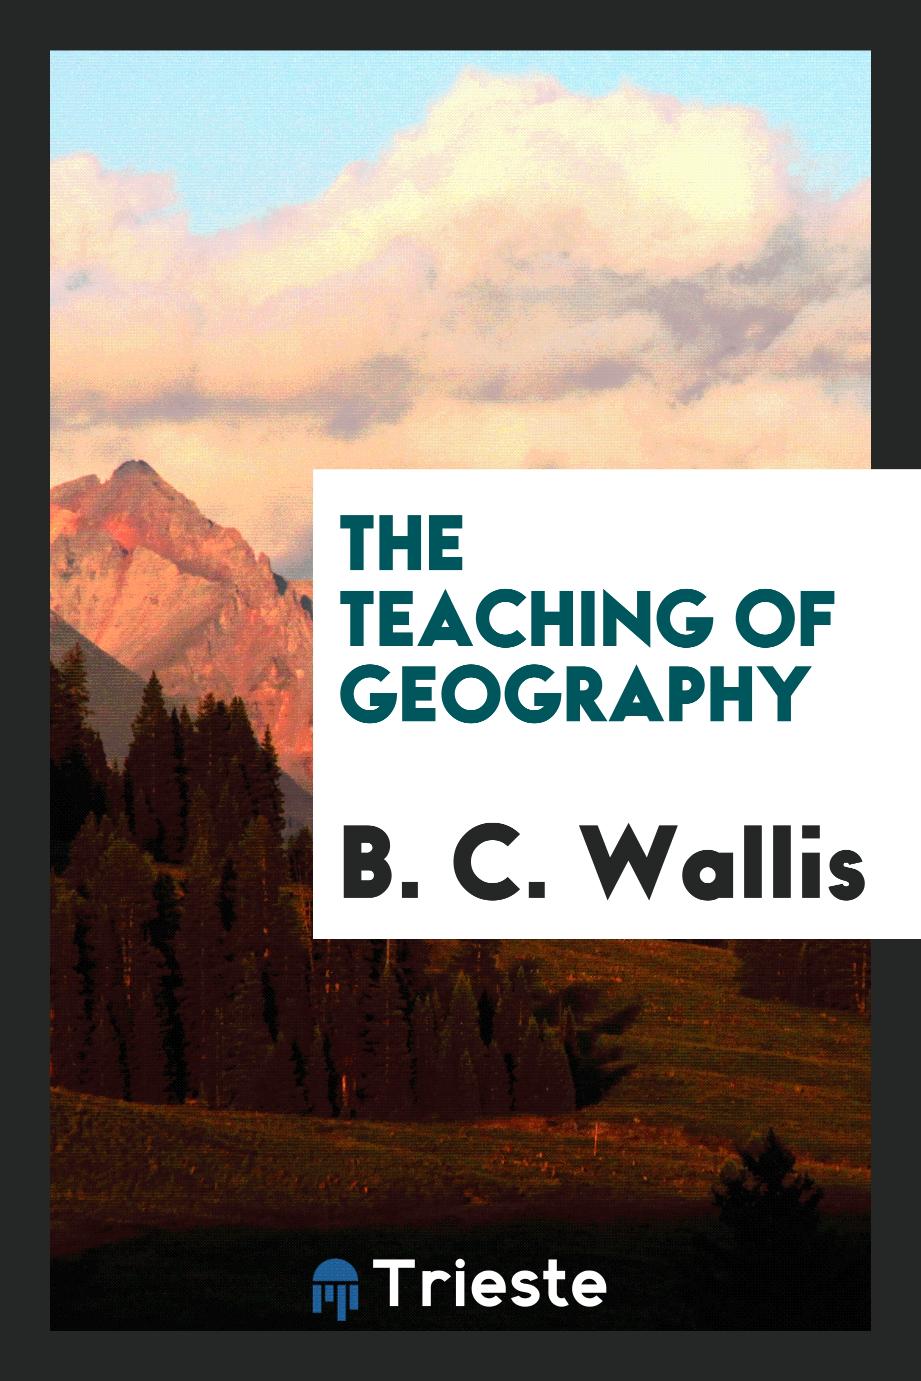 The teaching of geography